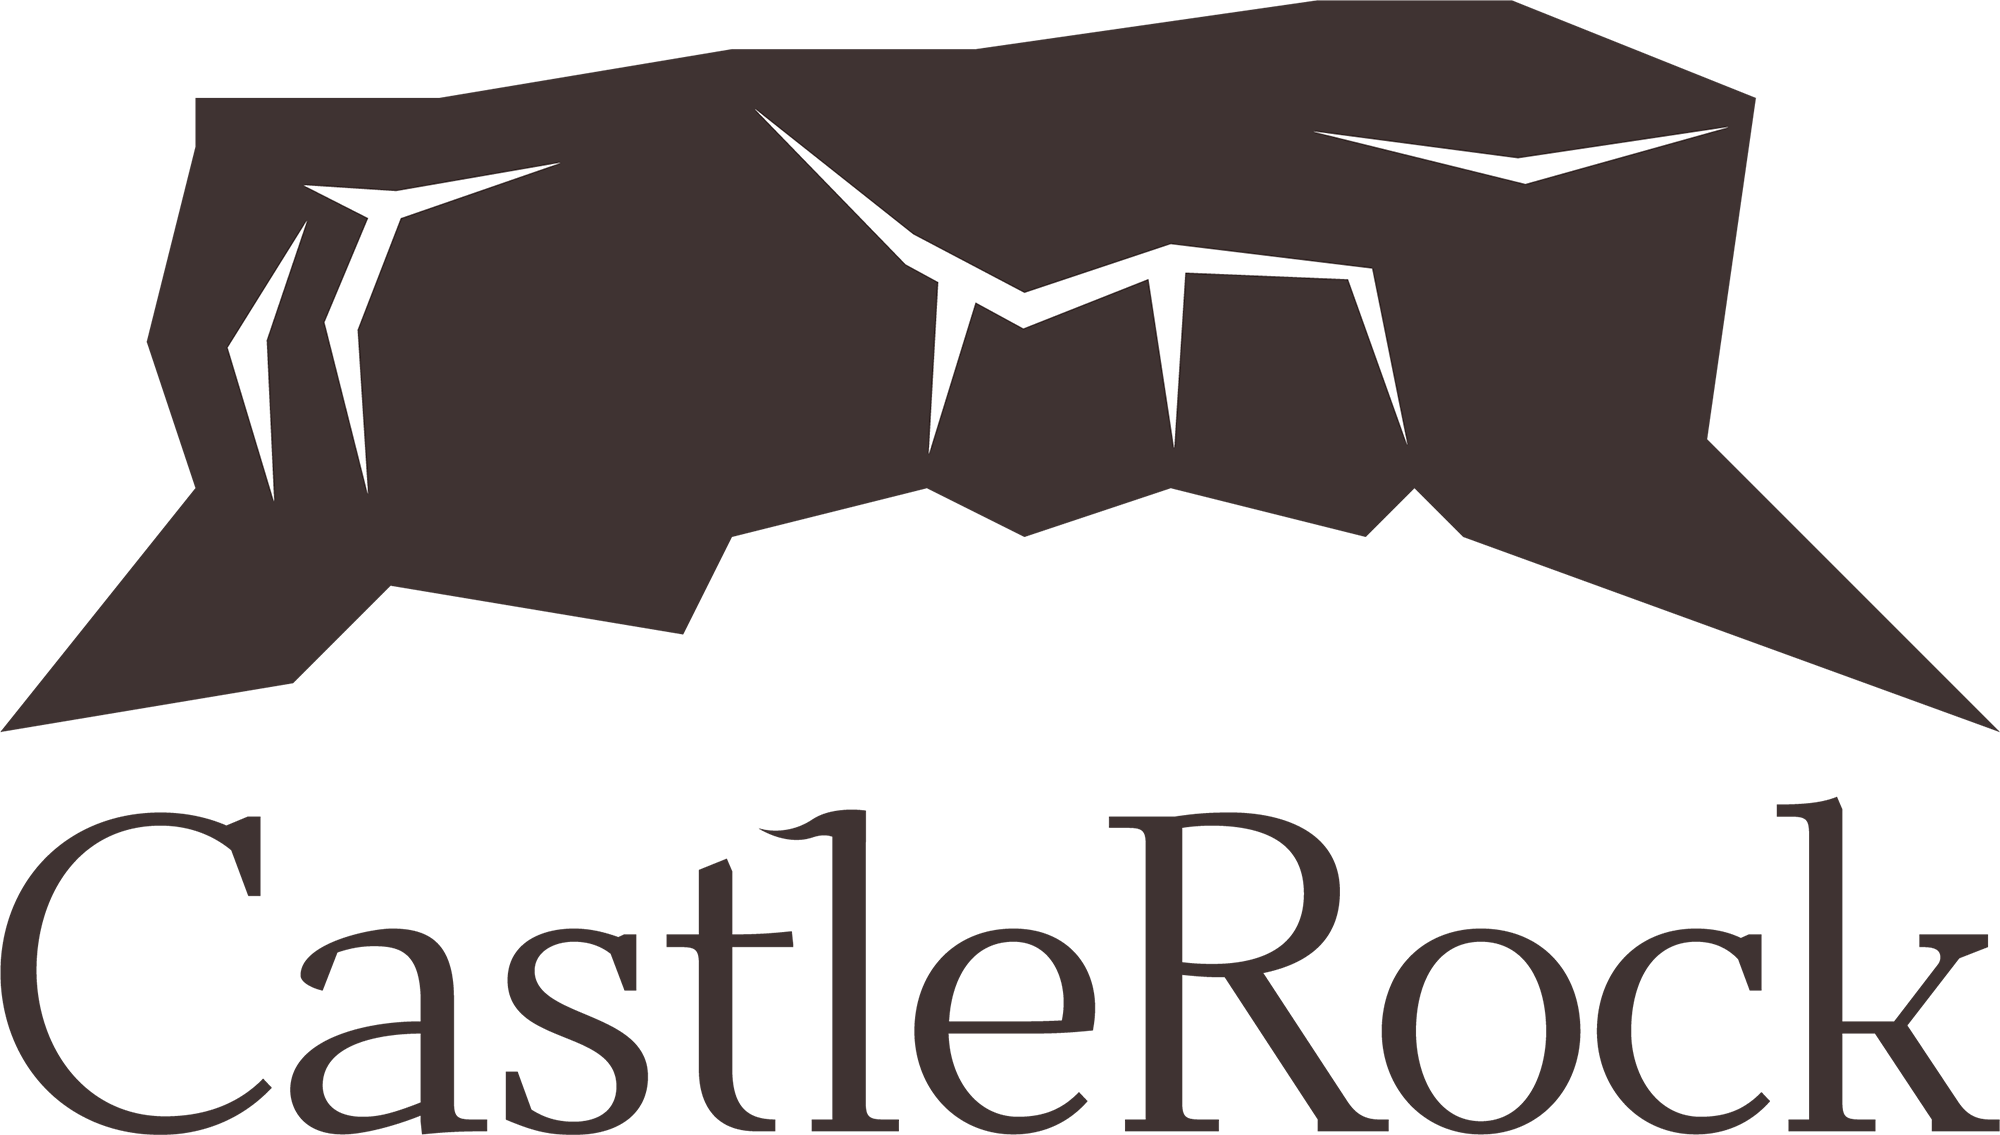 Castle Rock Investment Company Woman Owned